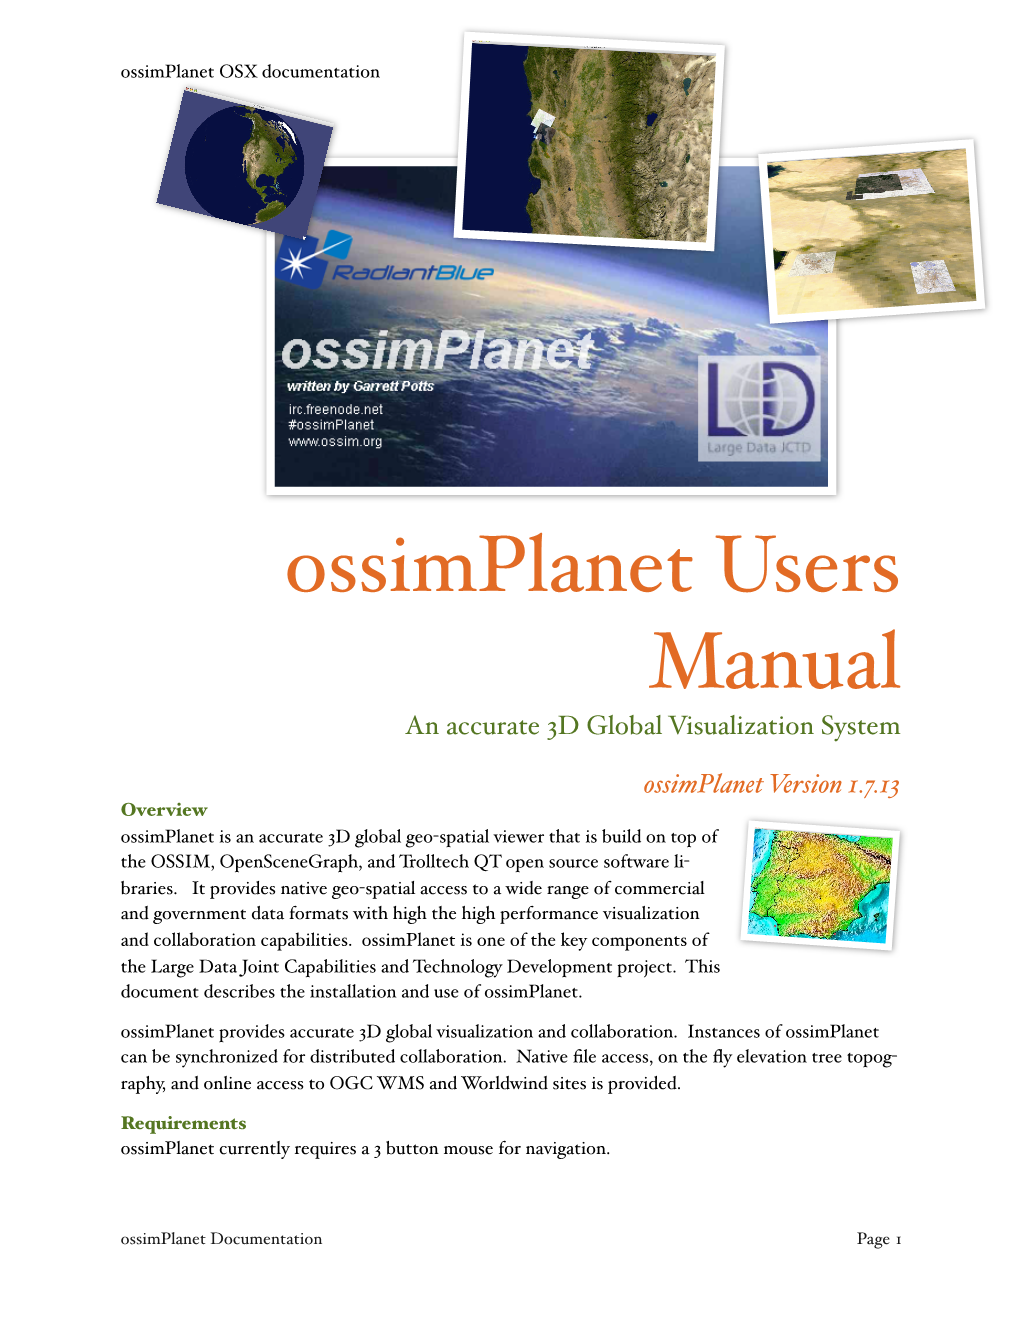 Ossimplanet Users Manual an Accurate 3D Global Visualization System